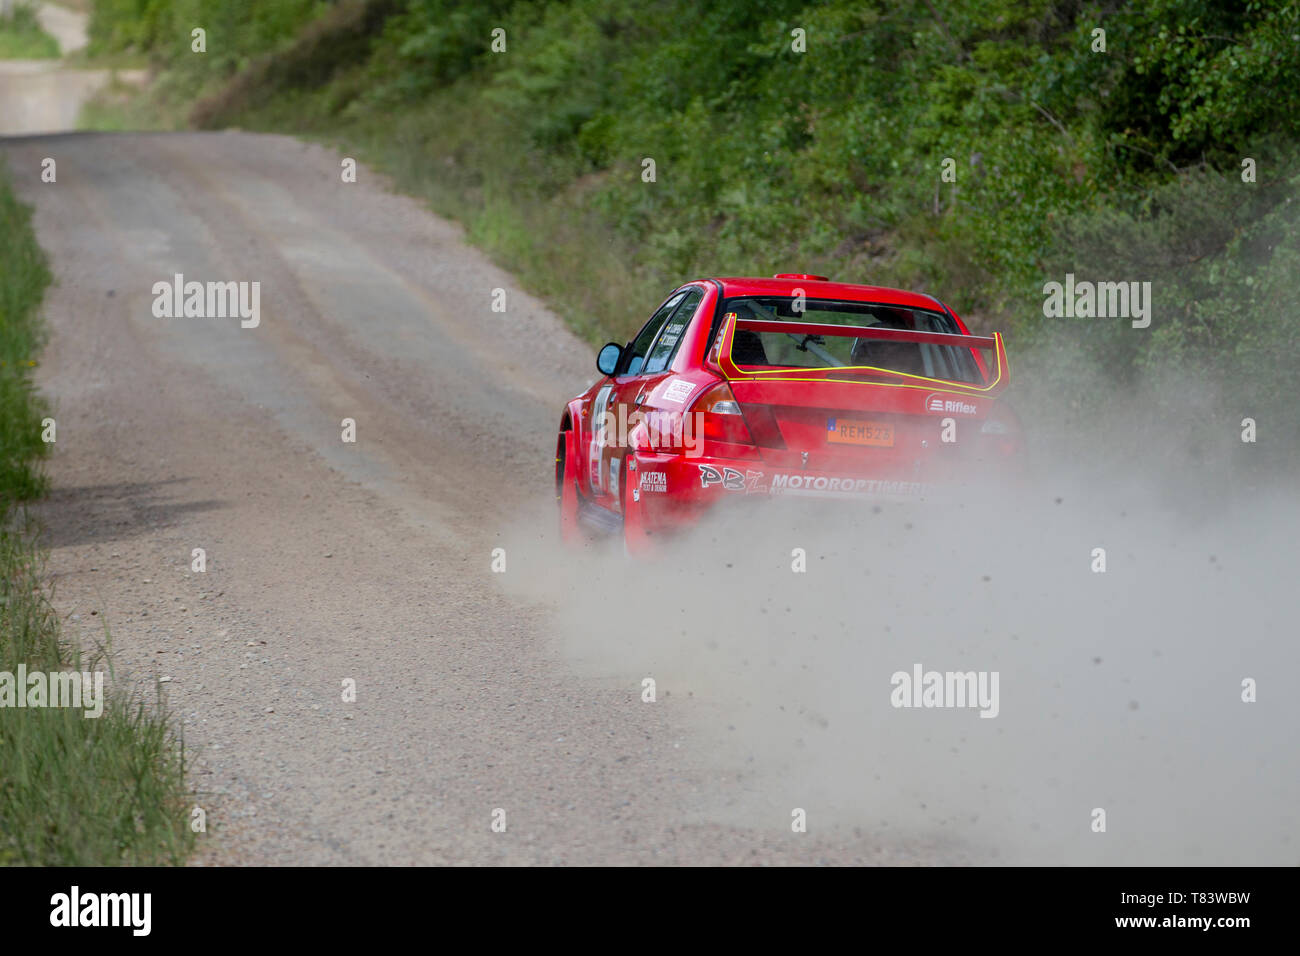 Fast rally car on a dusty dirt road in sweden Stock Photo